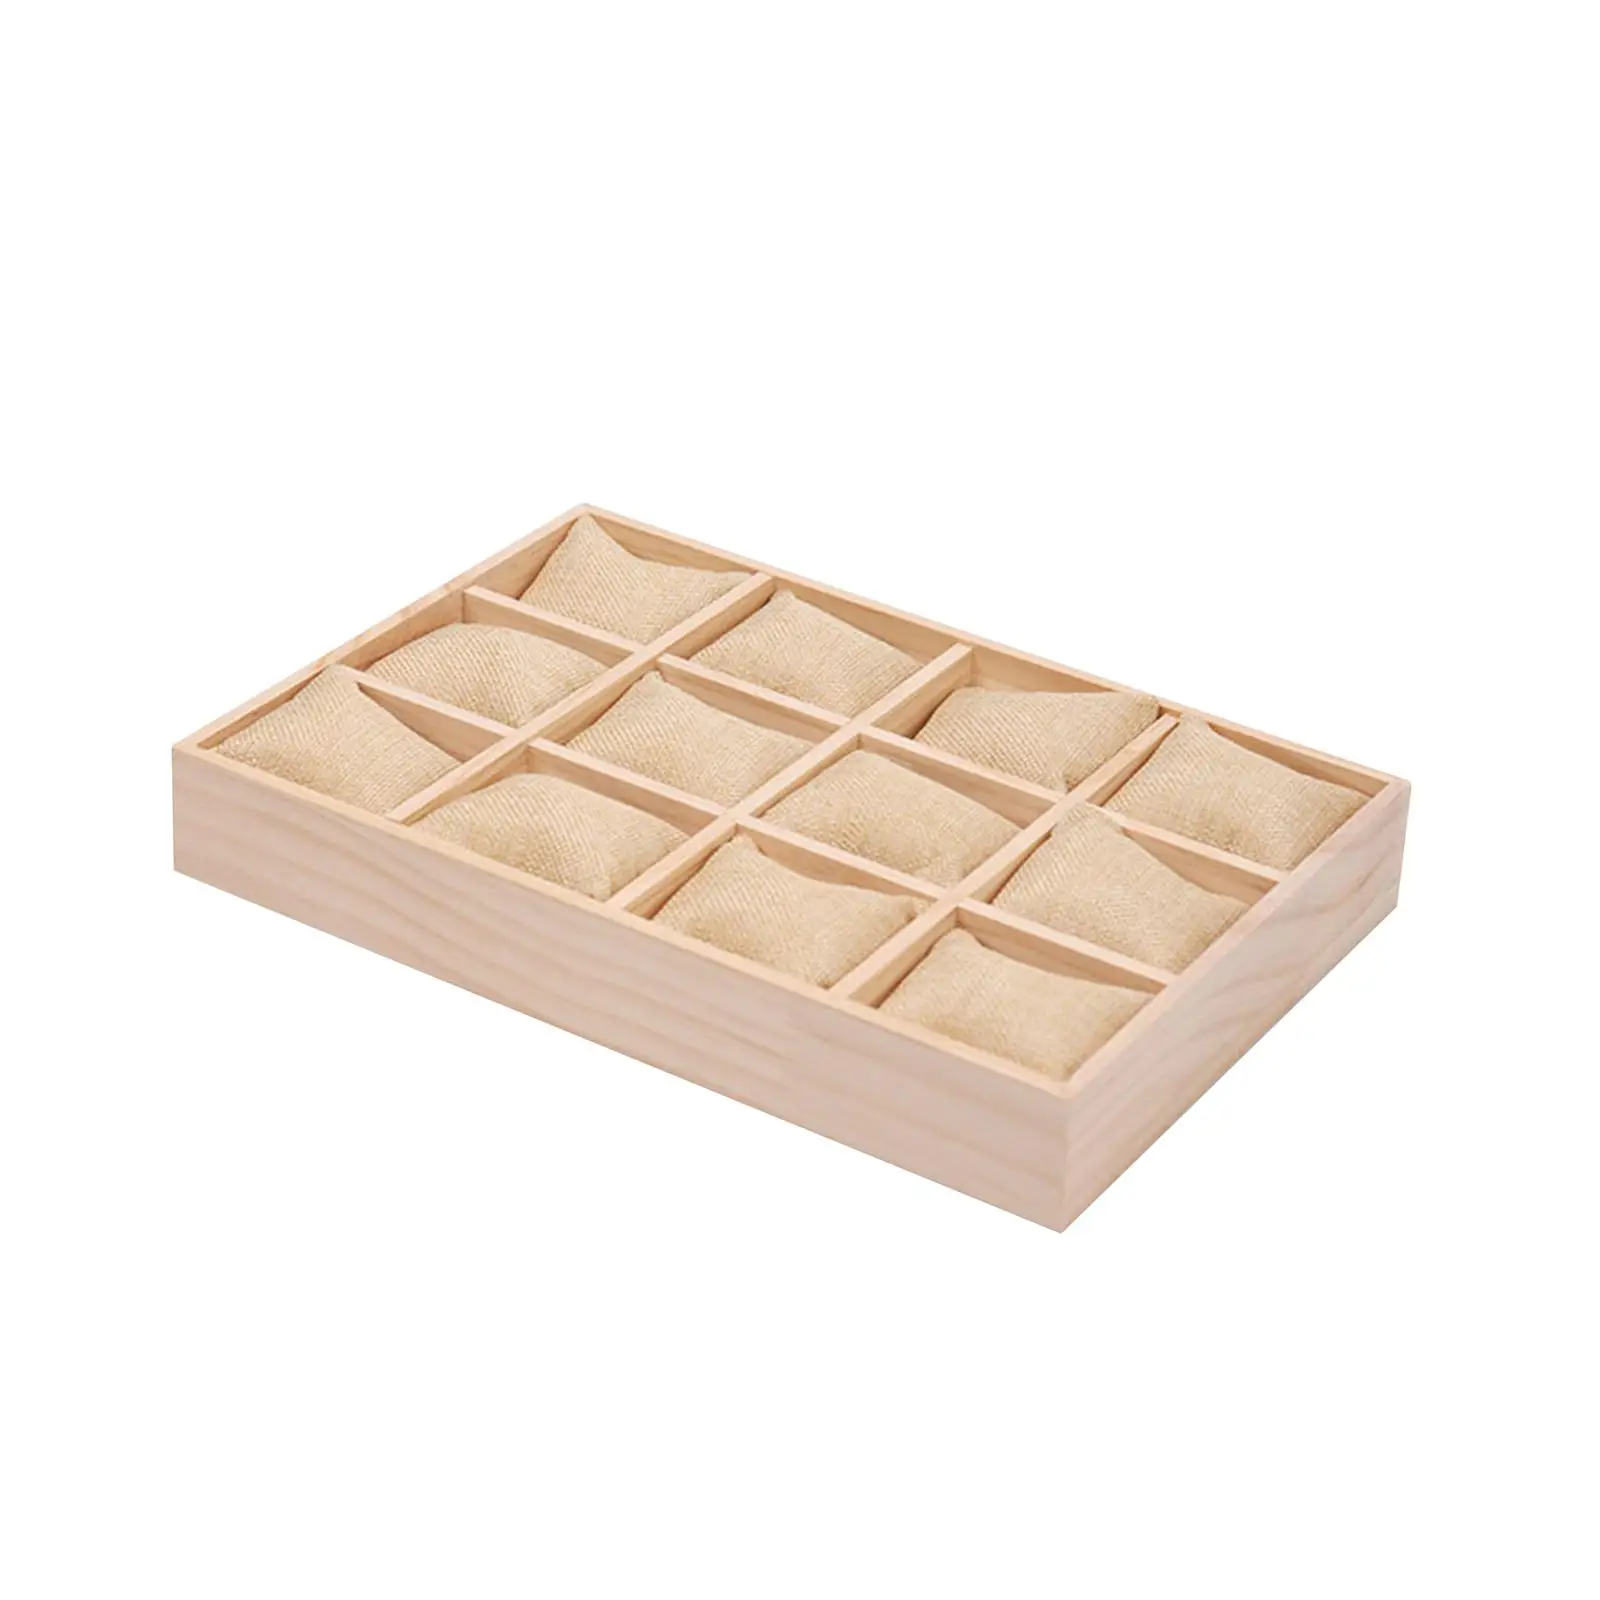 Watch Tray Stackable Wooden Bracelet Display Showcase 12 Grids Watch Organizer for Gifts Bracelets Counter Drawer Shop